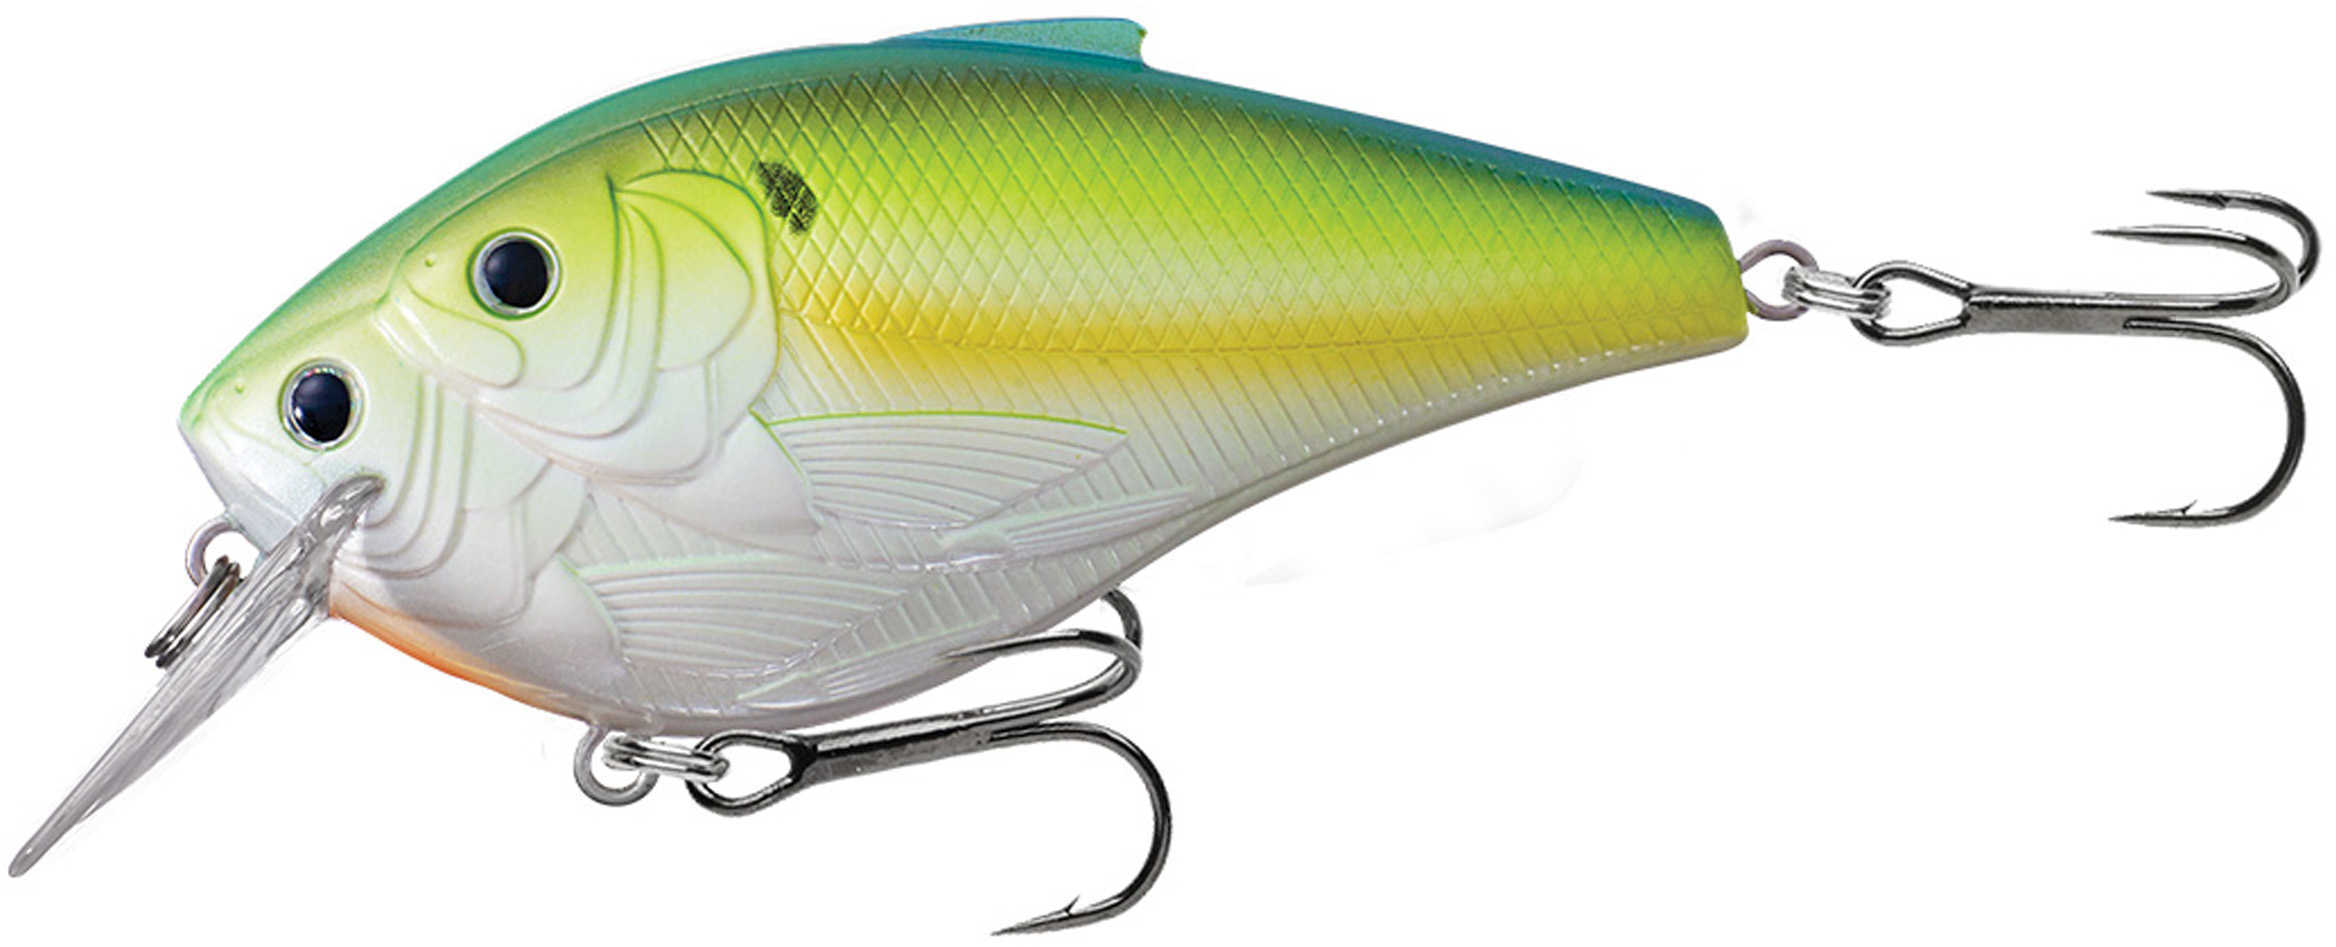 LIVETARGET Lures / Koppers Fishing and Tackle Corp Threadfin Shad Squarebill 3 1/2" Number 1/0 Hook Size 5-6 Depth Chartreuse/Pearl/Blue